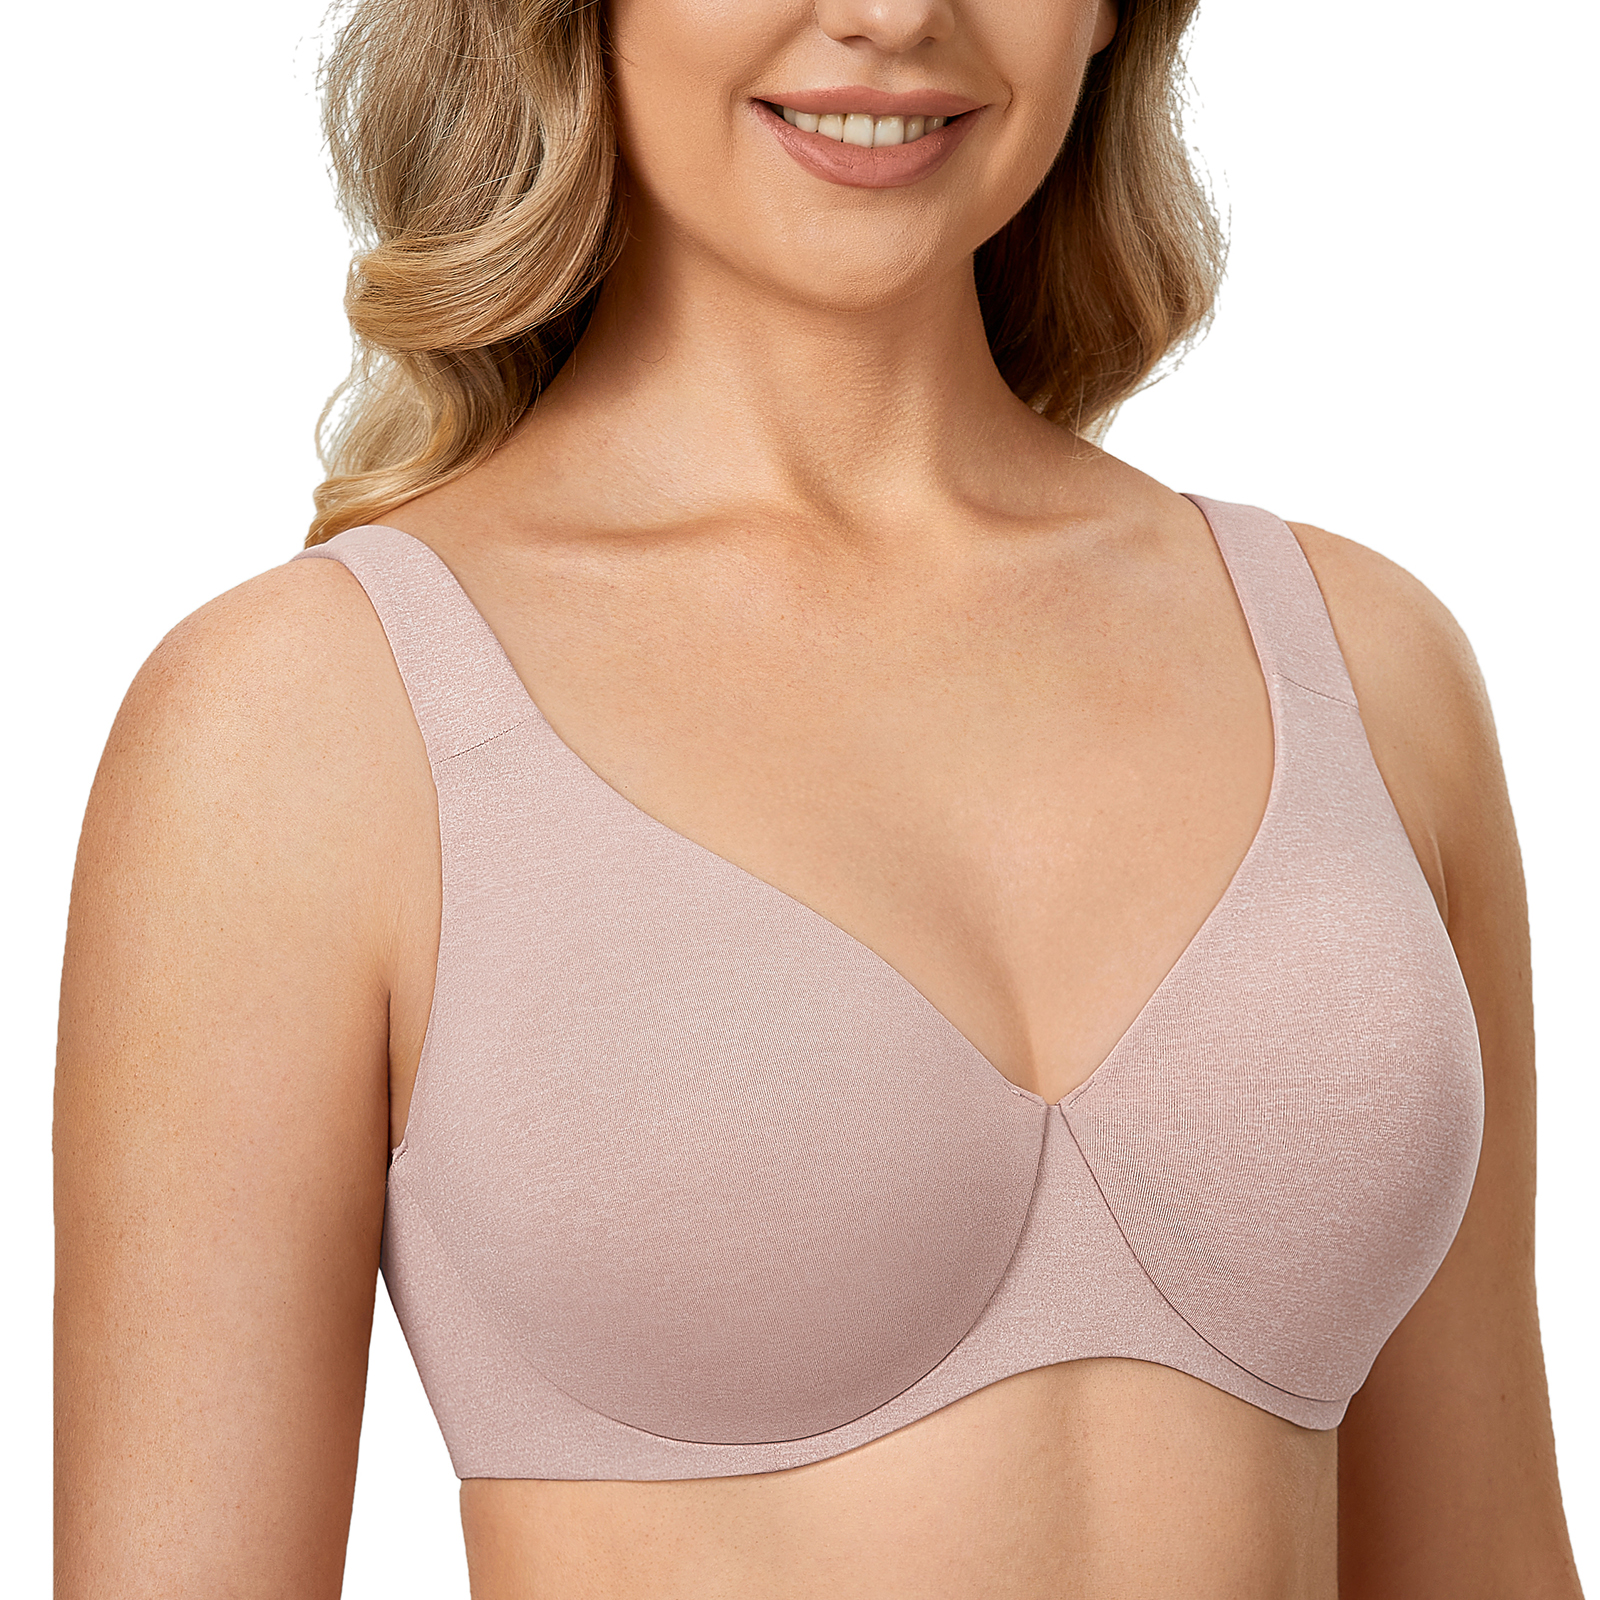 AISILIN Women's Plus Size Bras Minimizer Underwire Seamless Unlined Cup